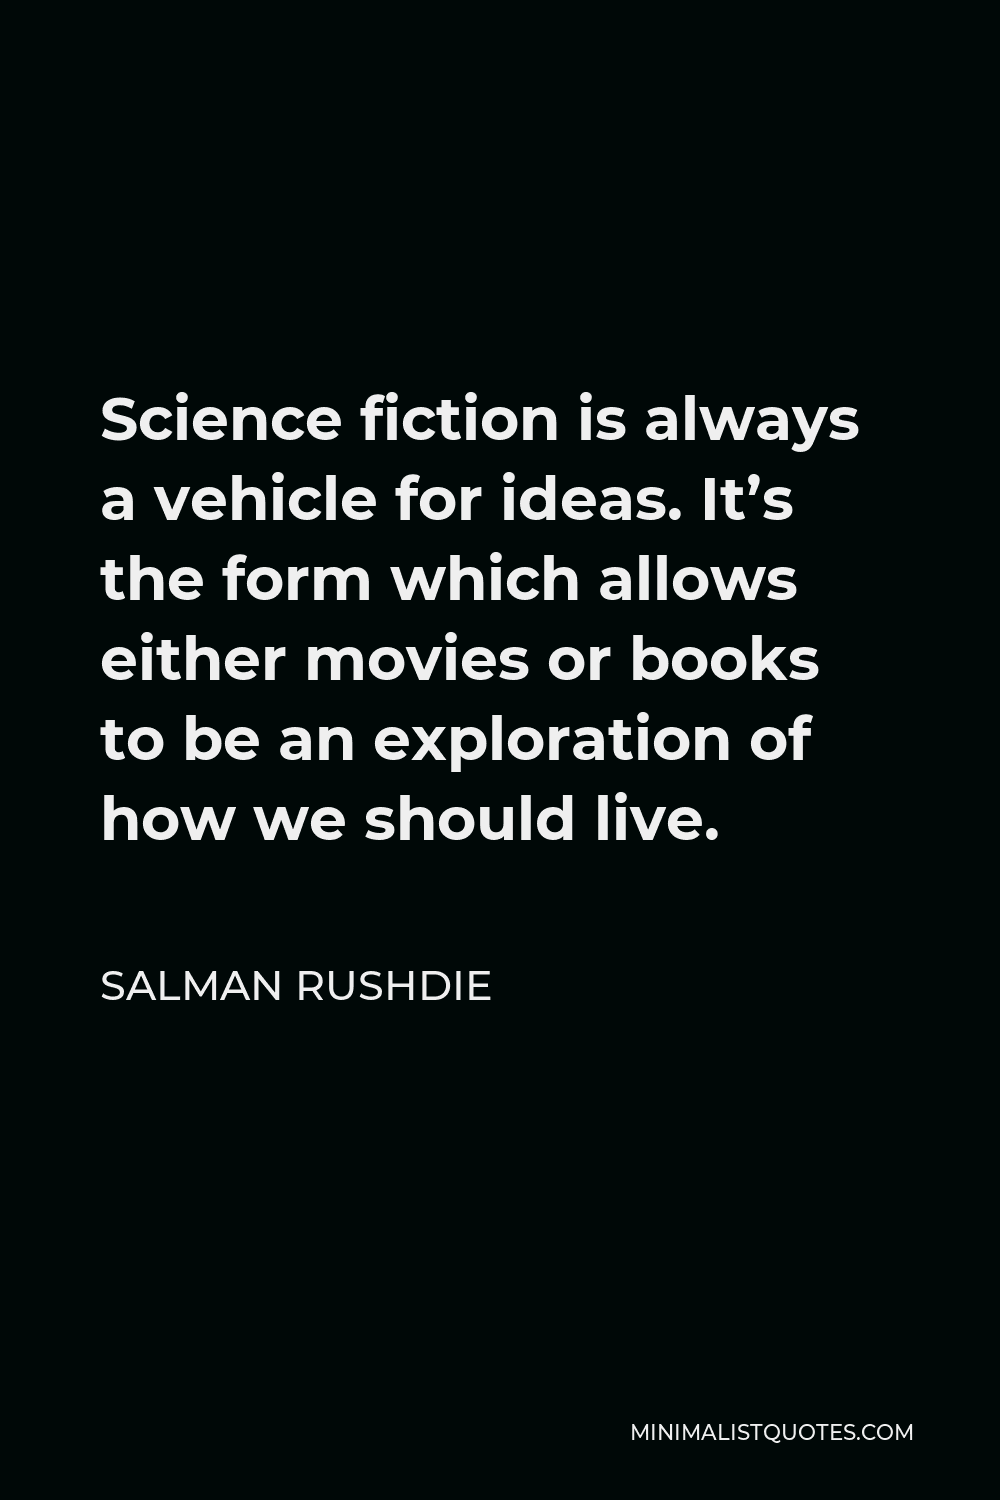 Salman Rushdie Quote - Science fiction is always a vehicle for ideas. It’s the form which allows either movies or books to be an exploration of how we should live.